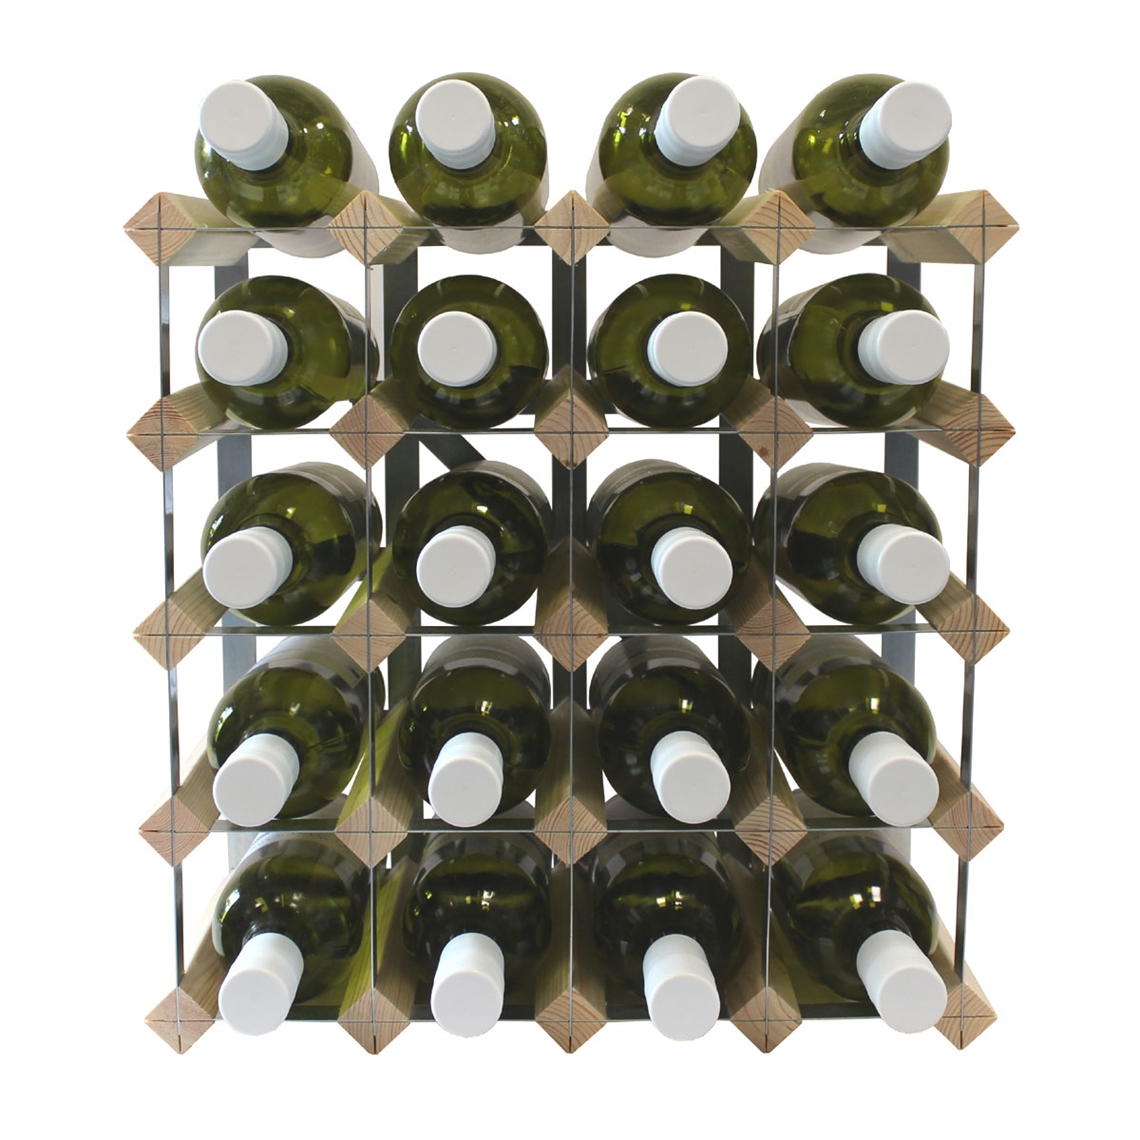 View more w series floor-to-ceiling frames from our Assembled Wine Racks range